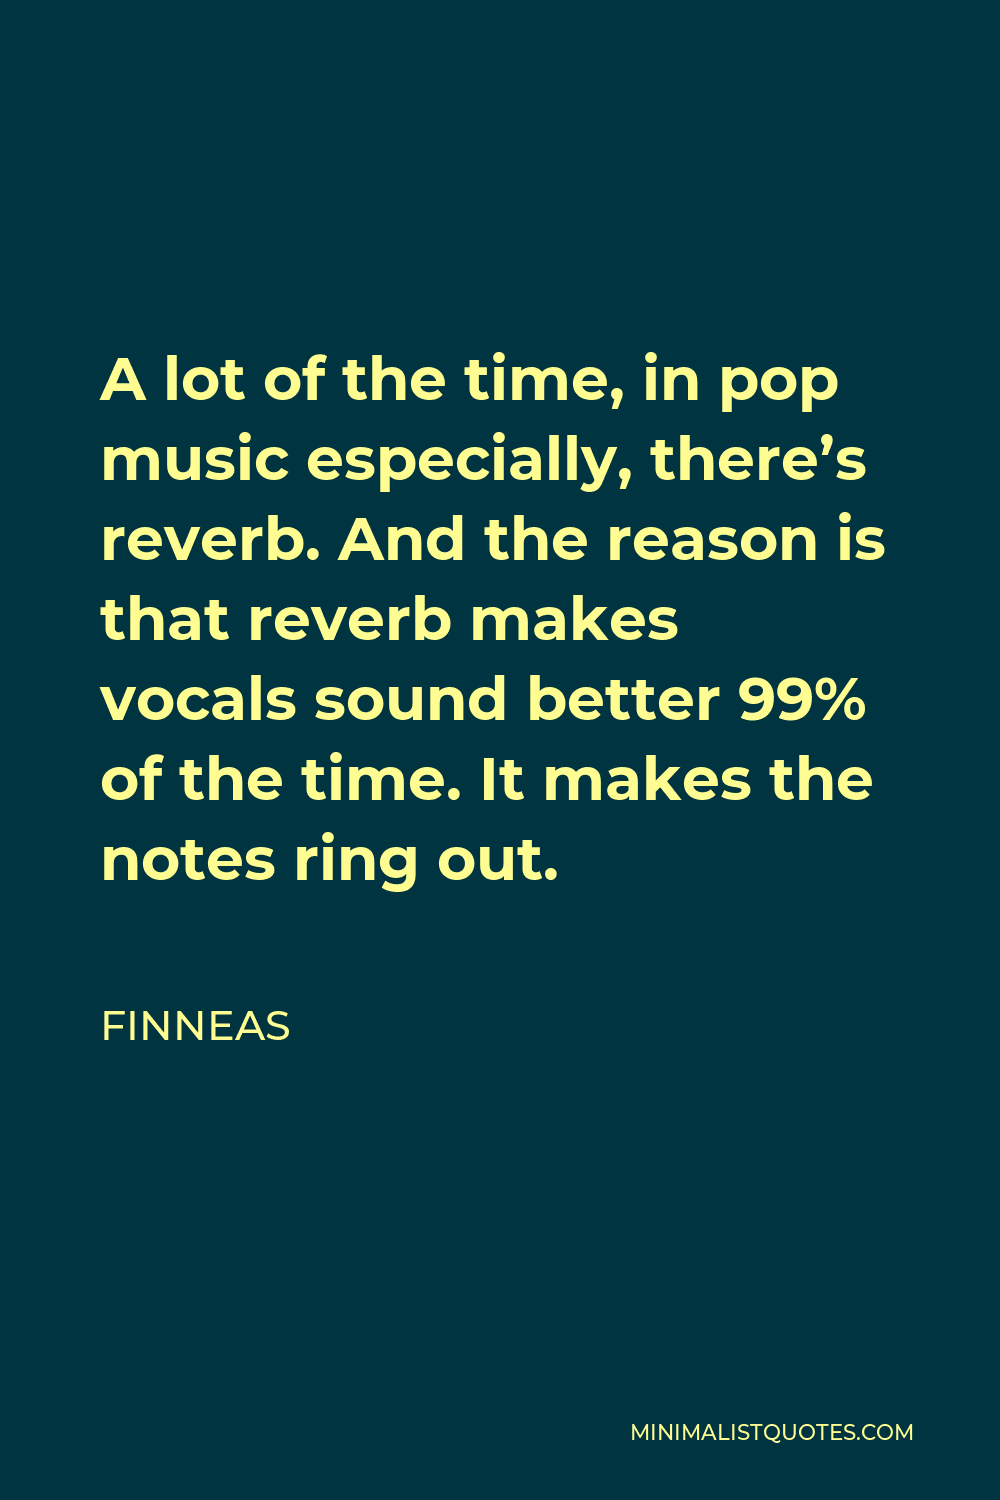 Finneas Quote - A lot of the time, in pop music especially, there’s reverb. And the reason is that reverb makes vocals sound better 99% of the time. It makes the notes ring out.